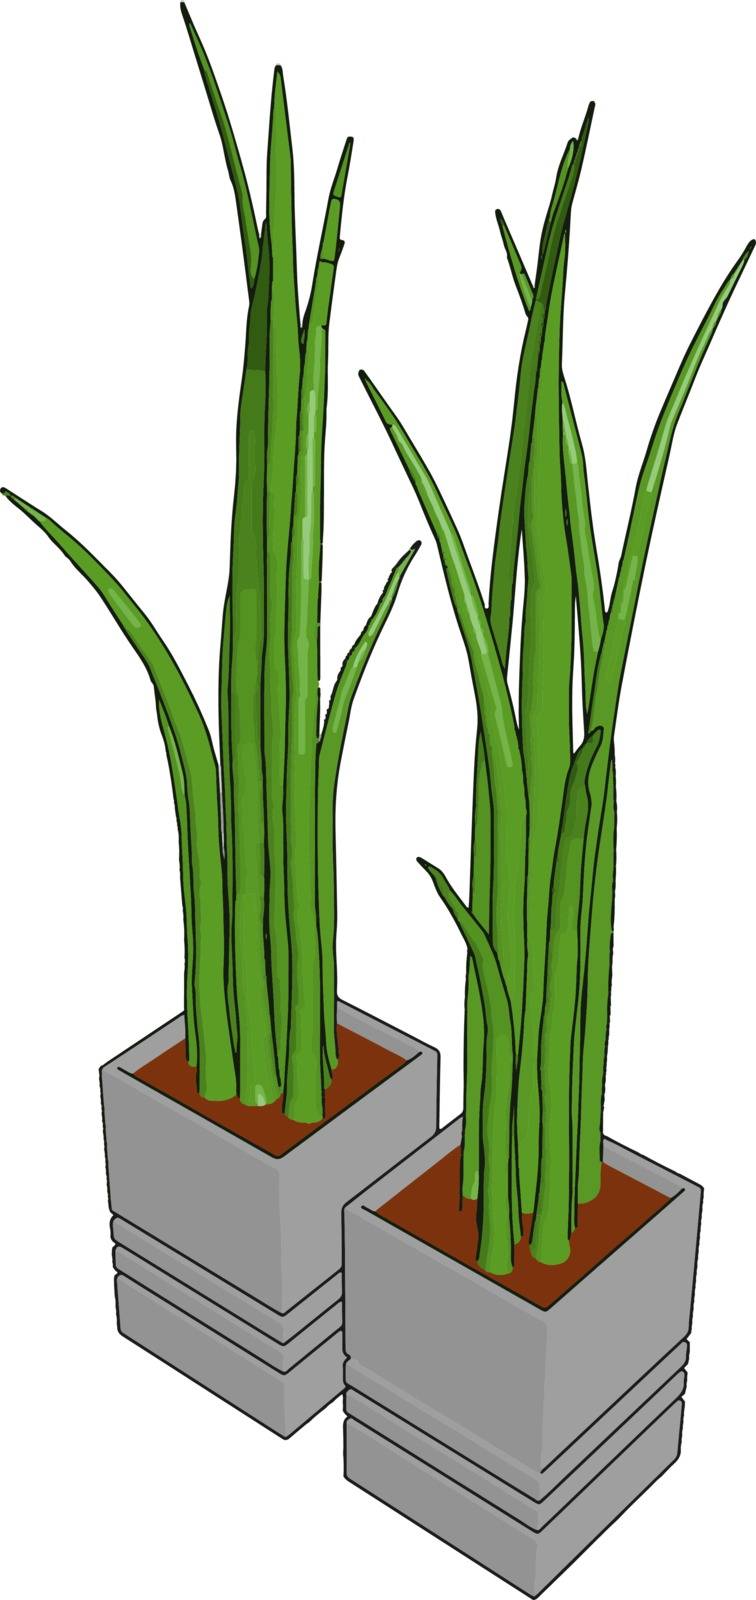 Grass in a pot, illustration, vector on white background.